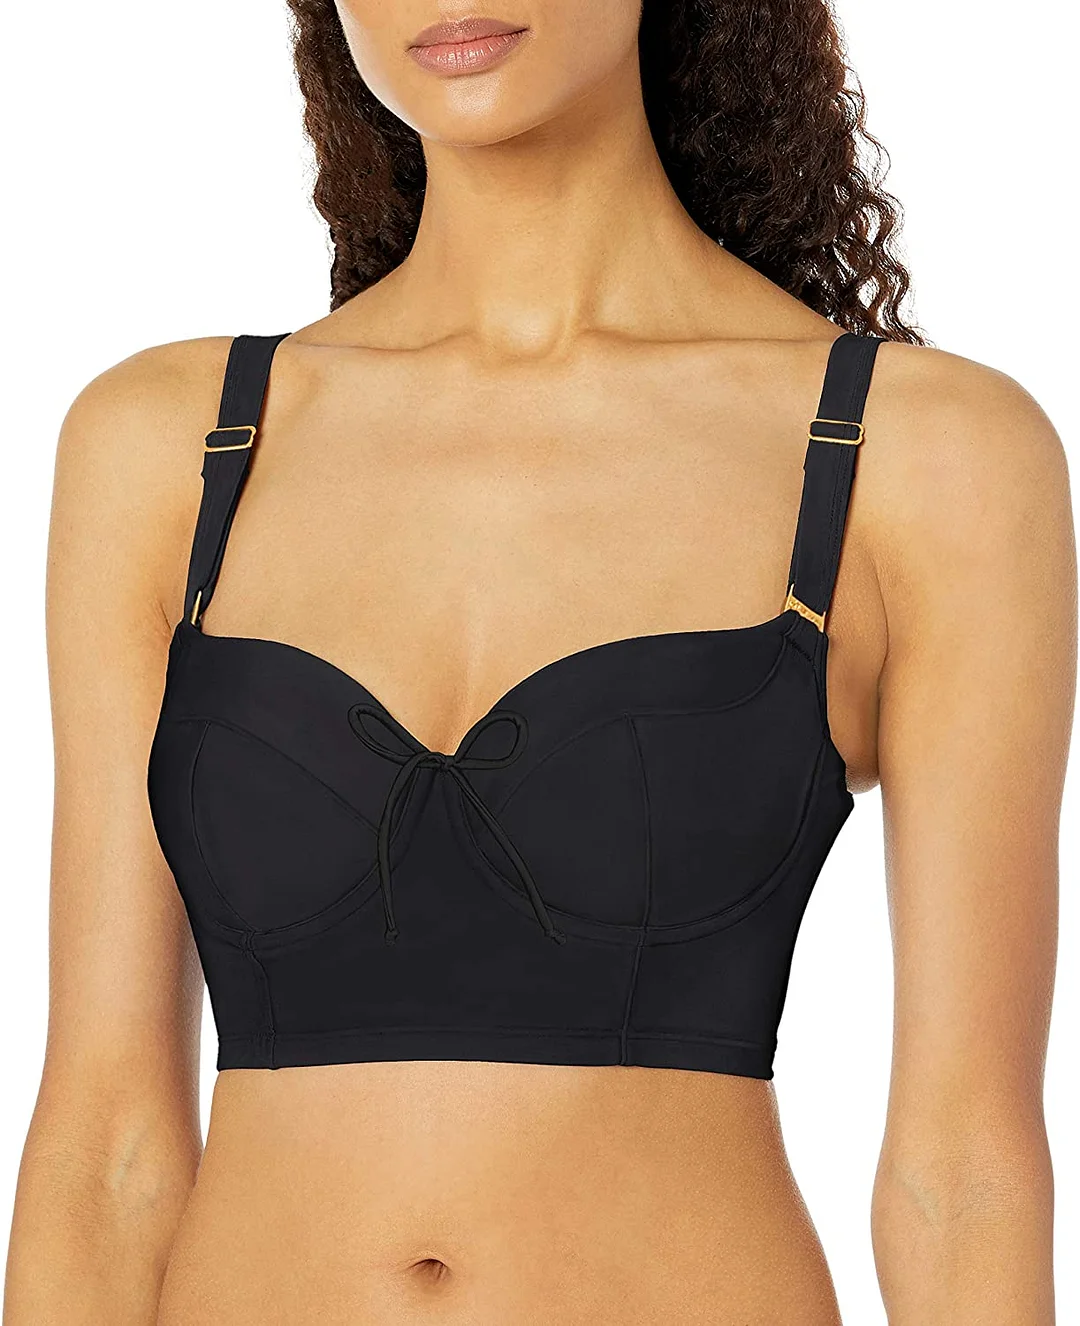 Women's Full-Busted Supportive Underwire Swimsuit Bikini Top